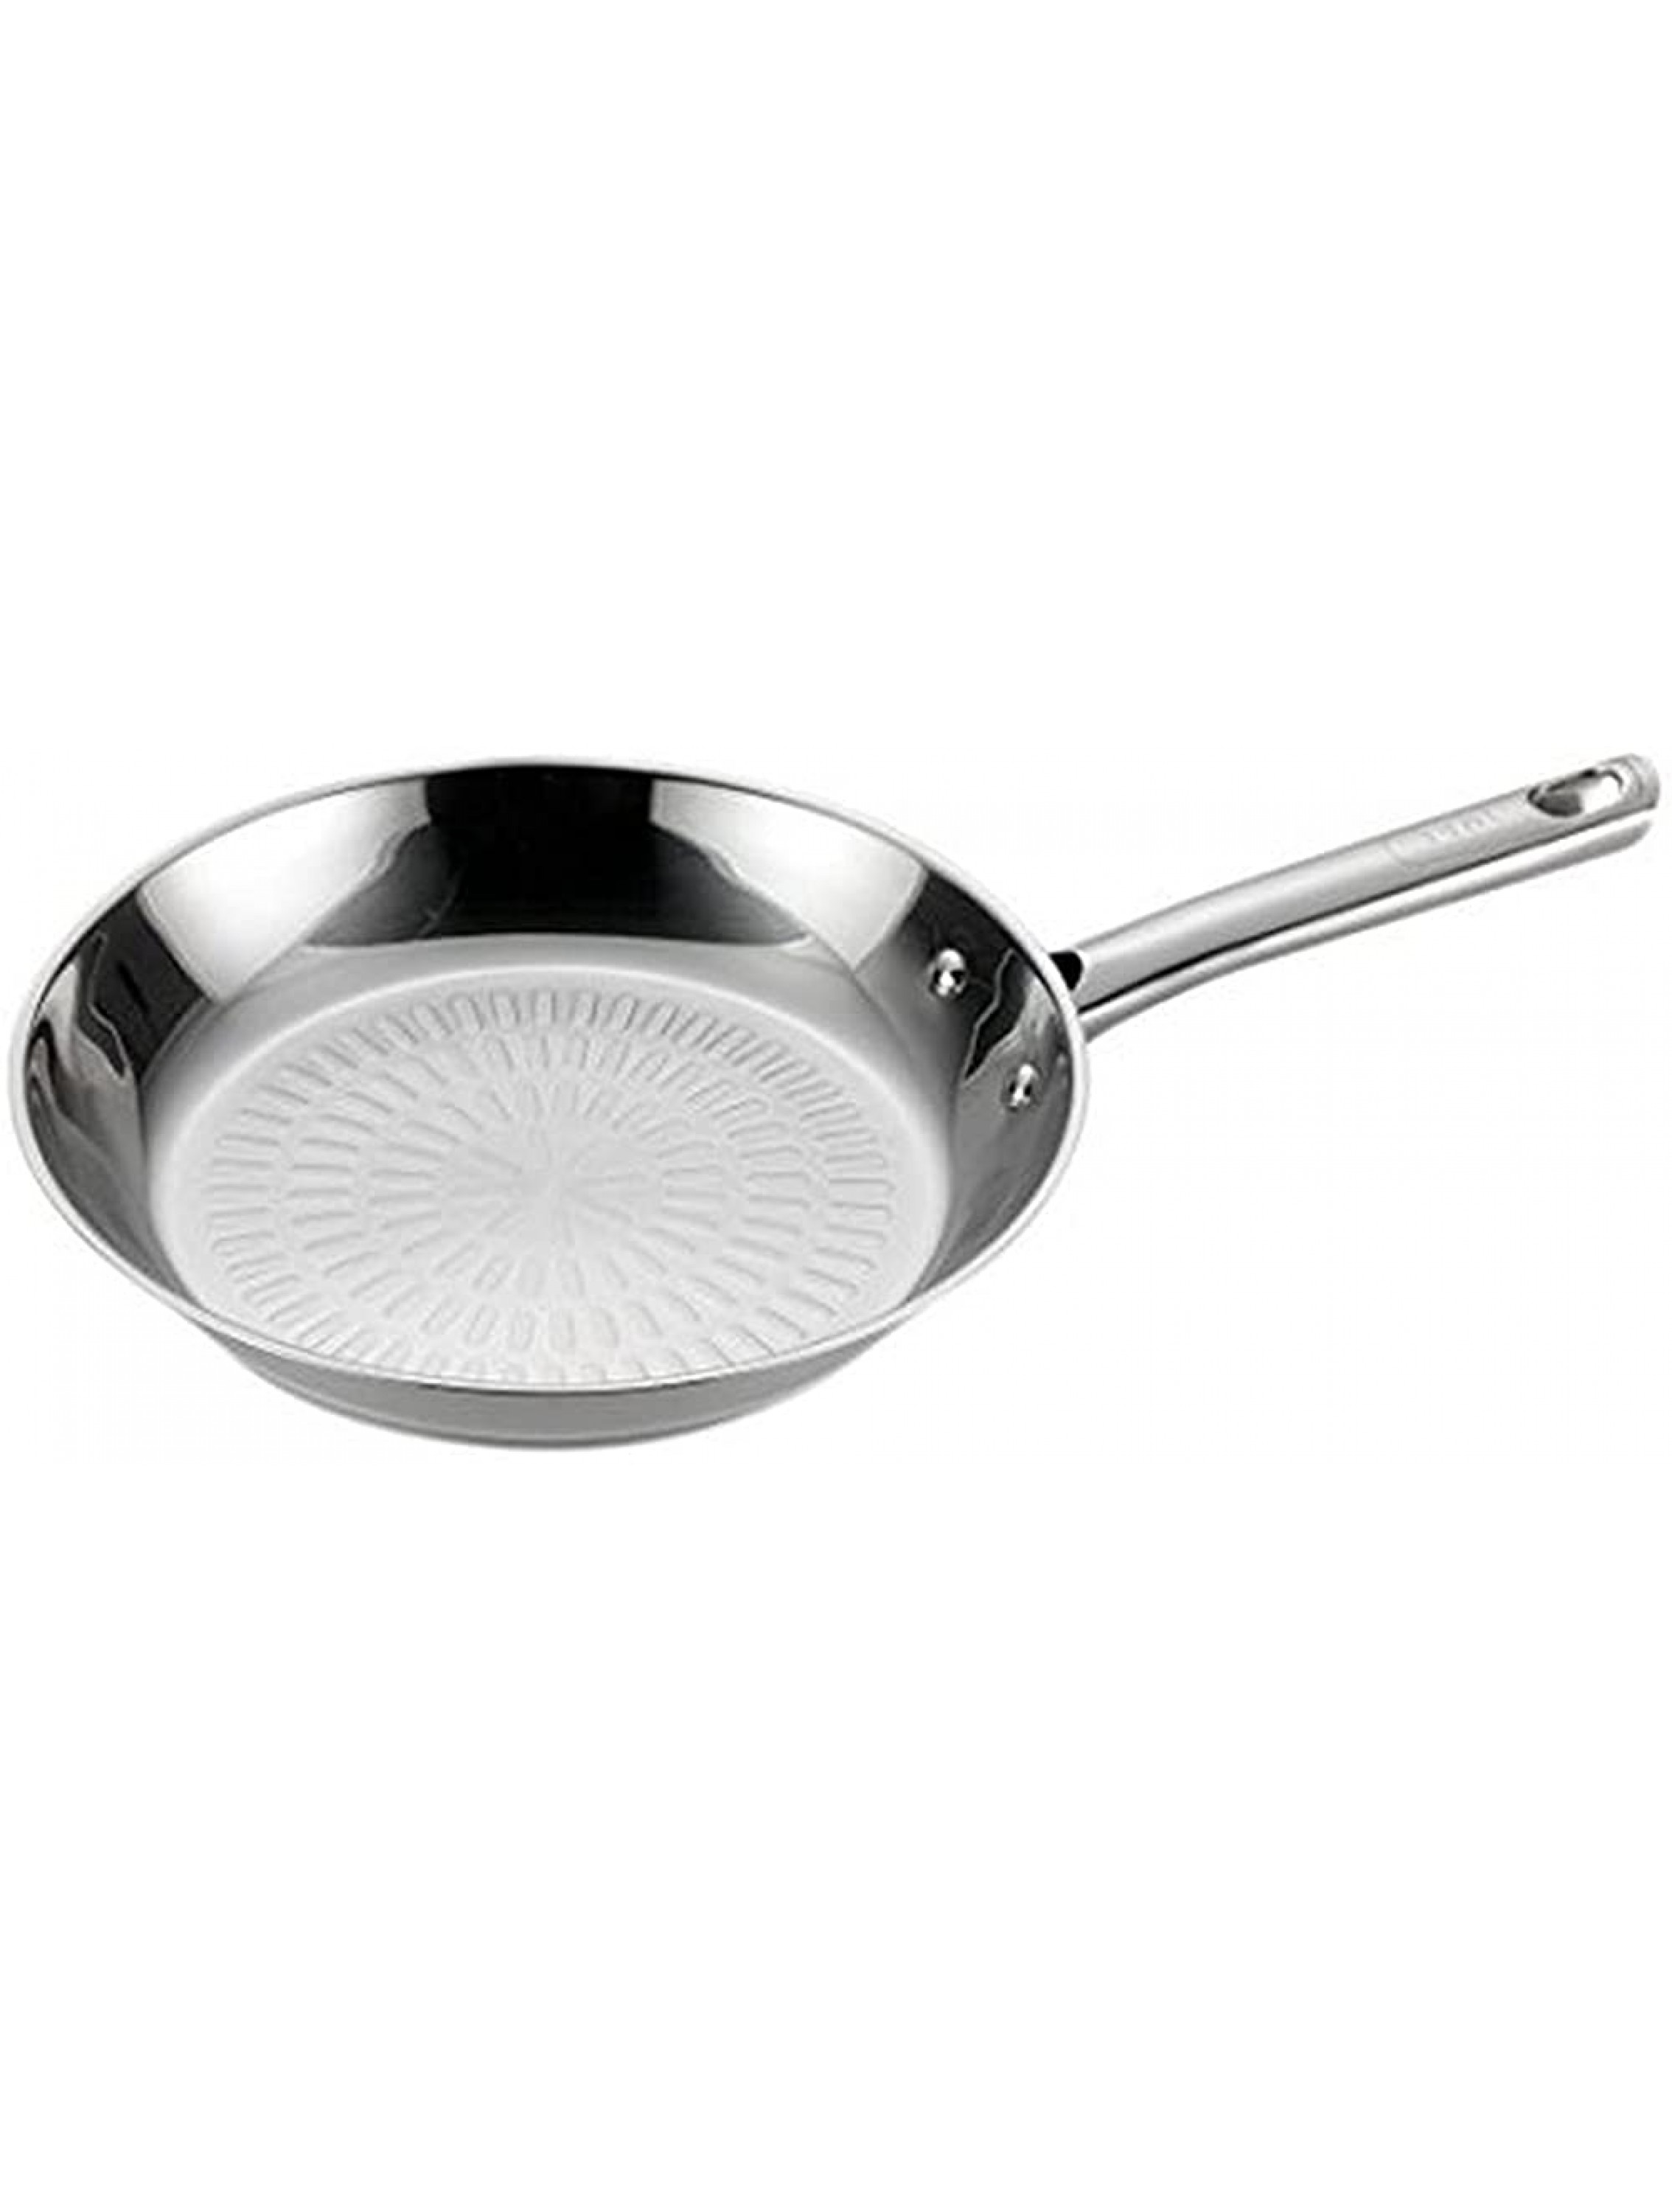 T-fal E76007 Performa Stainless Steel Dishwasher Safe Oven Safe Fry Pan Saute Pan Cookware 12-Inch Silver - BKNMYNCR3